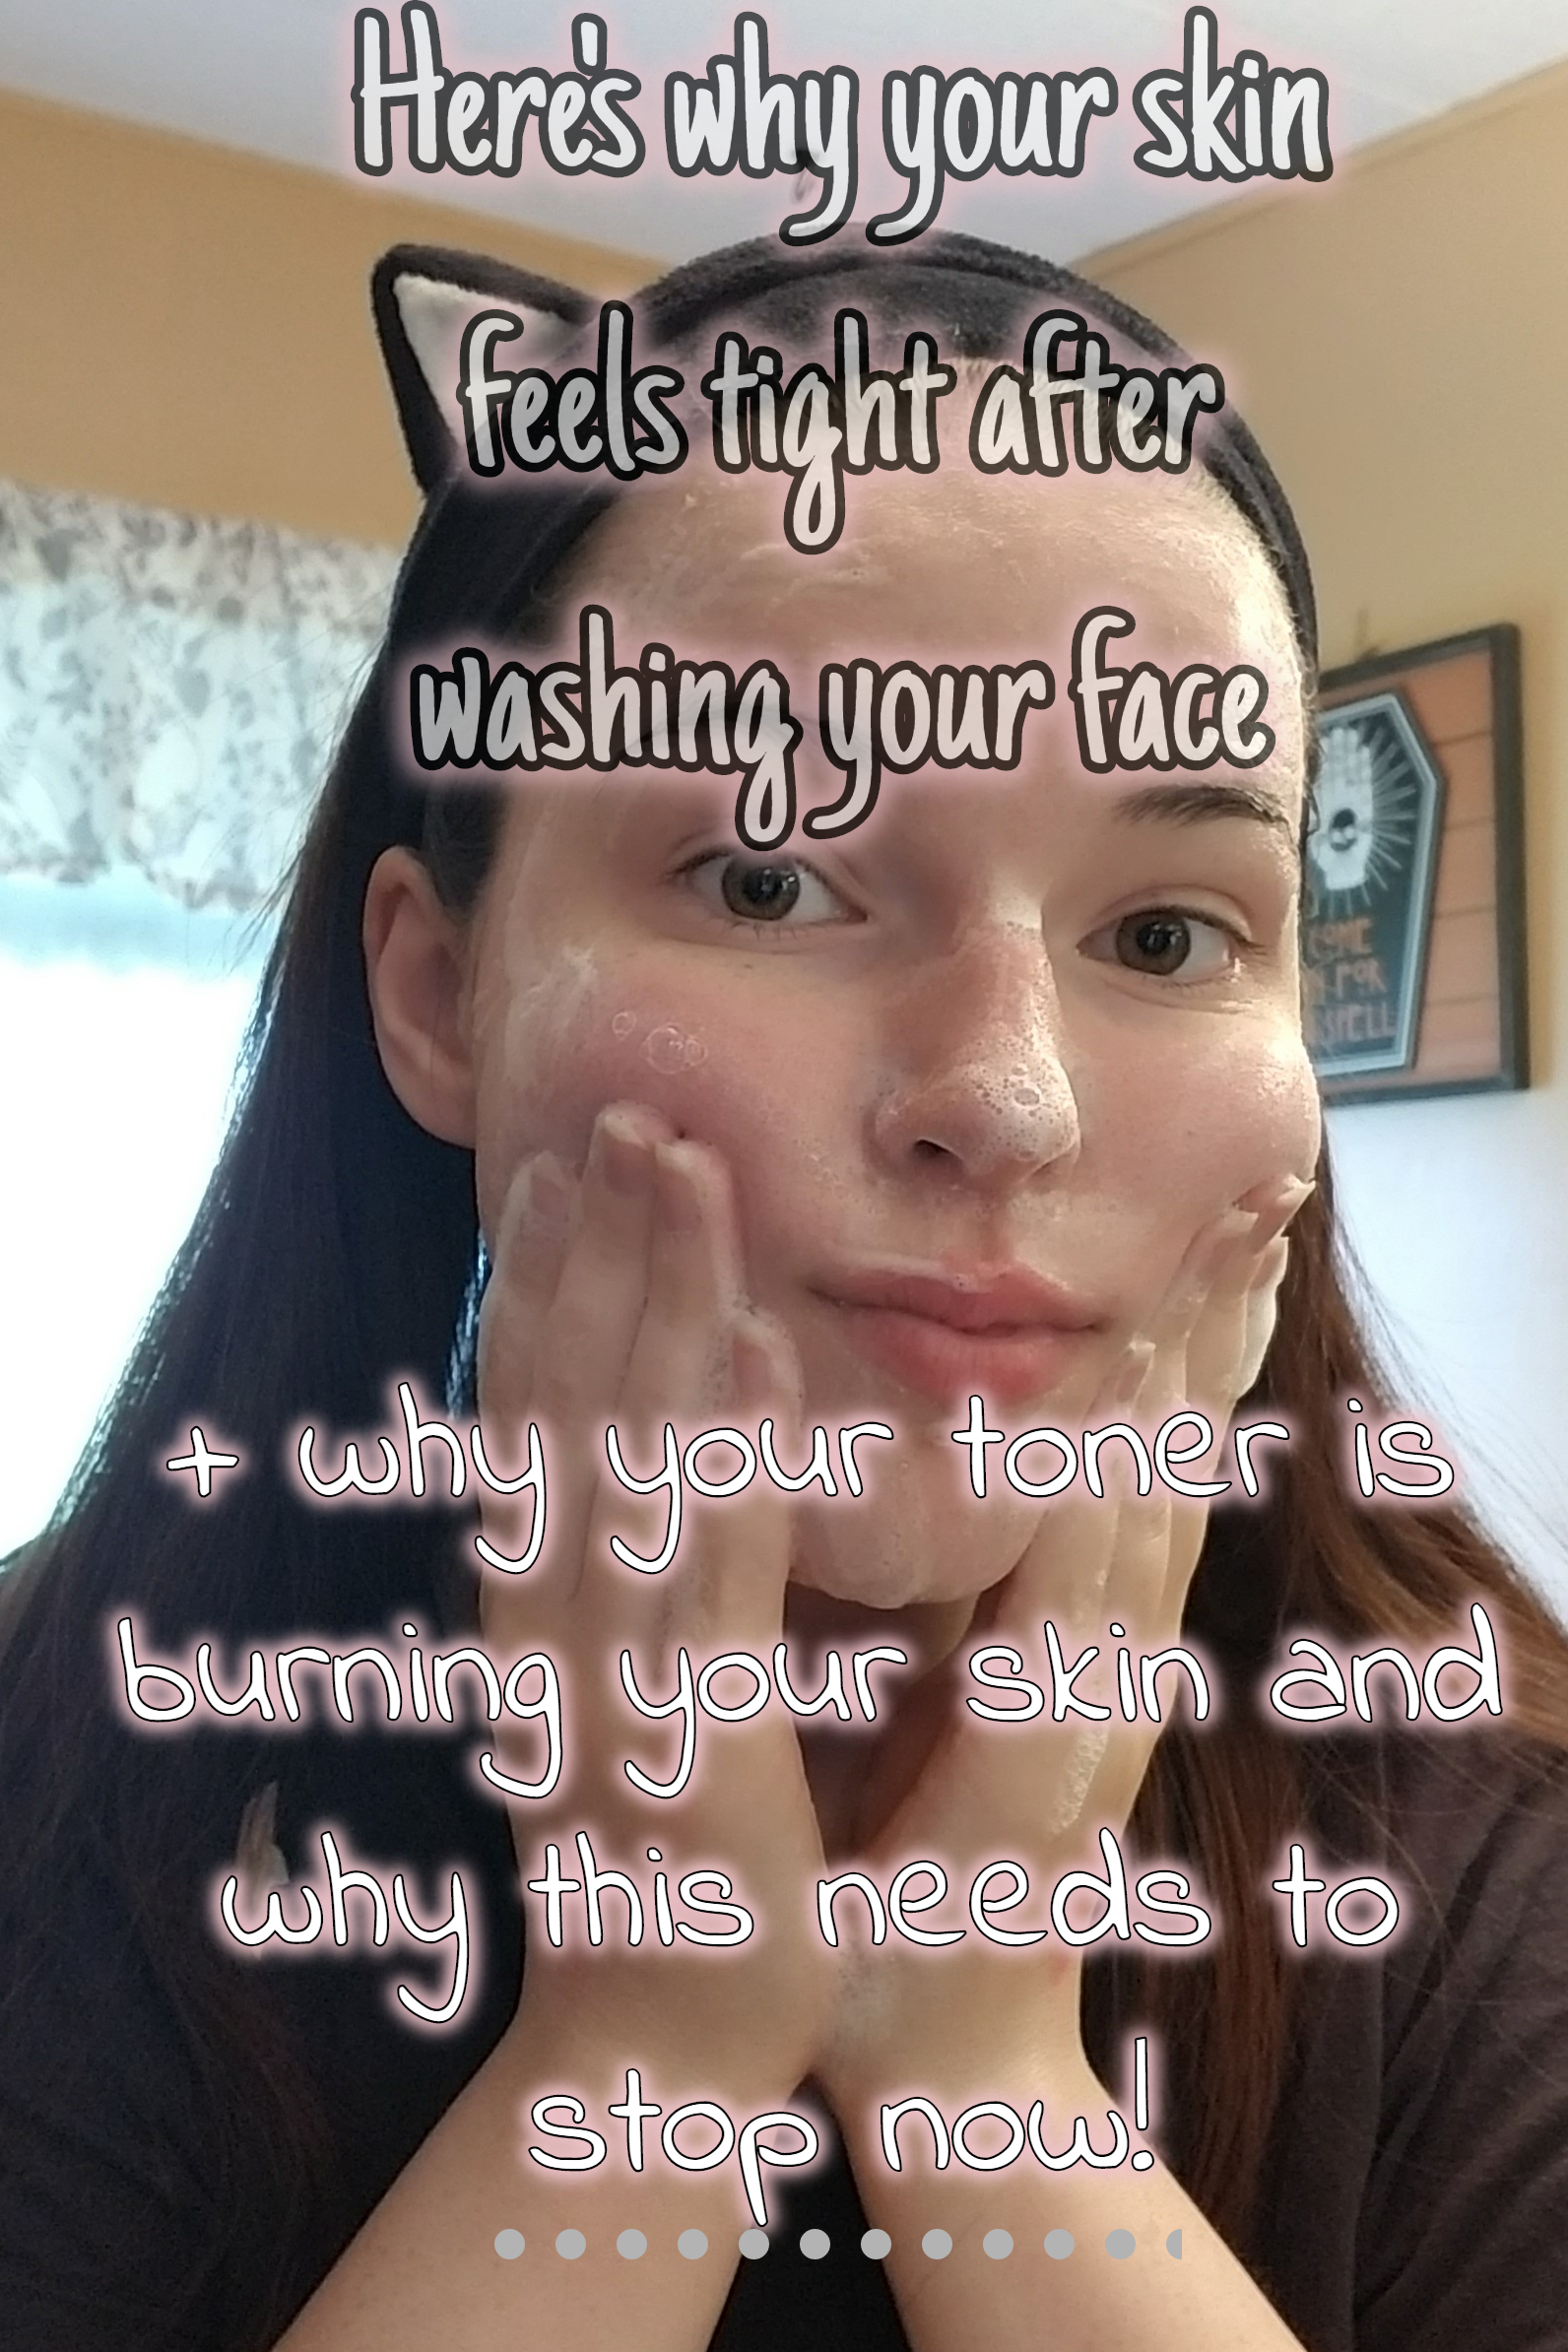 Here's why your skin feels tight after cleansing! + why your toner sometimes burns and how to stop it!